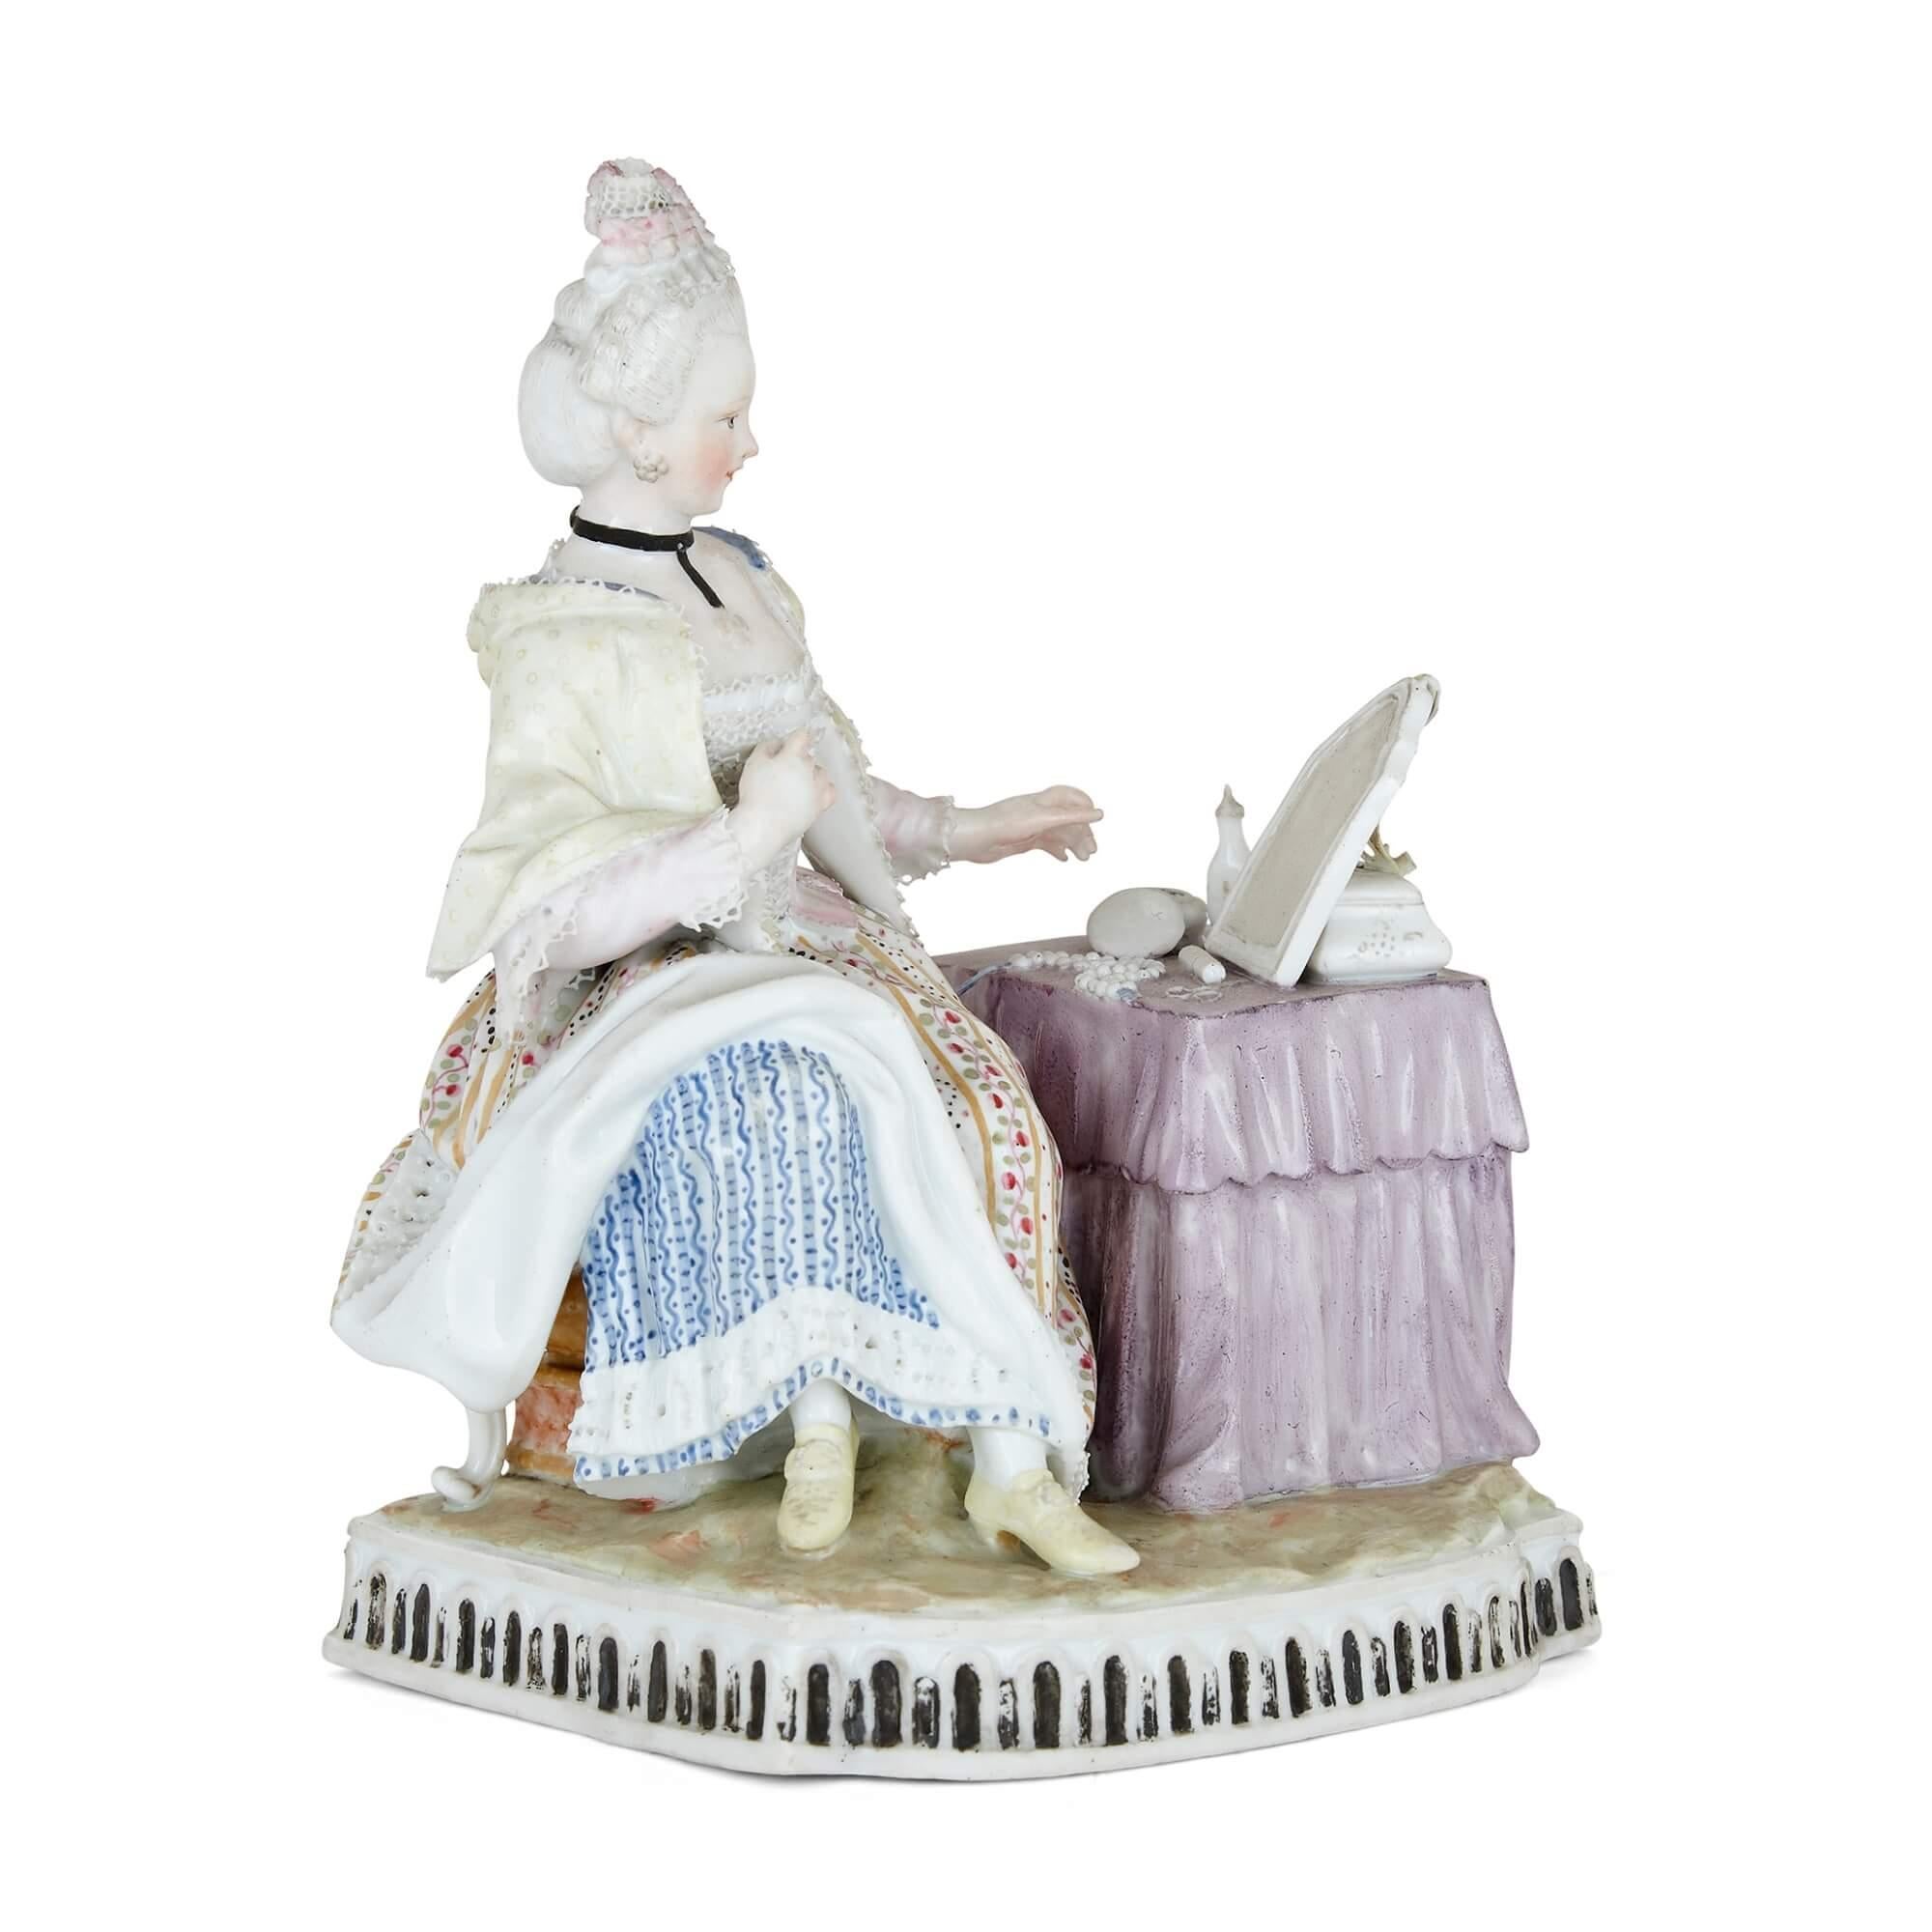 Rococo style porcelain figure of a woman by Meissen
German, 19th Century
Height 15cm, width 12cm, depth 8.5cm

This charming porcelain figure depicts a woman seated at her vanity table. Wearing exceptionally fine dress, she sits to the side, her